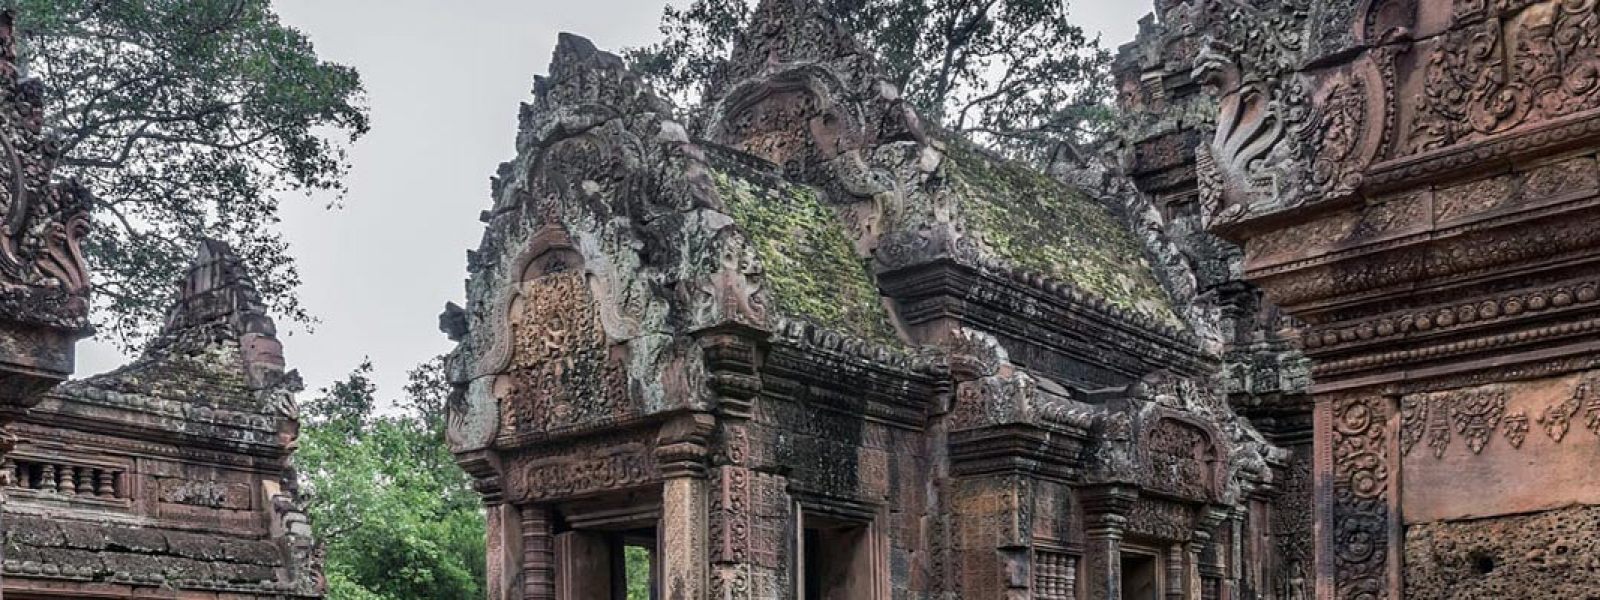 Destinations in Banteay Meanchey